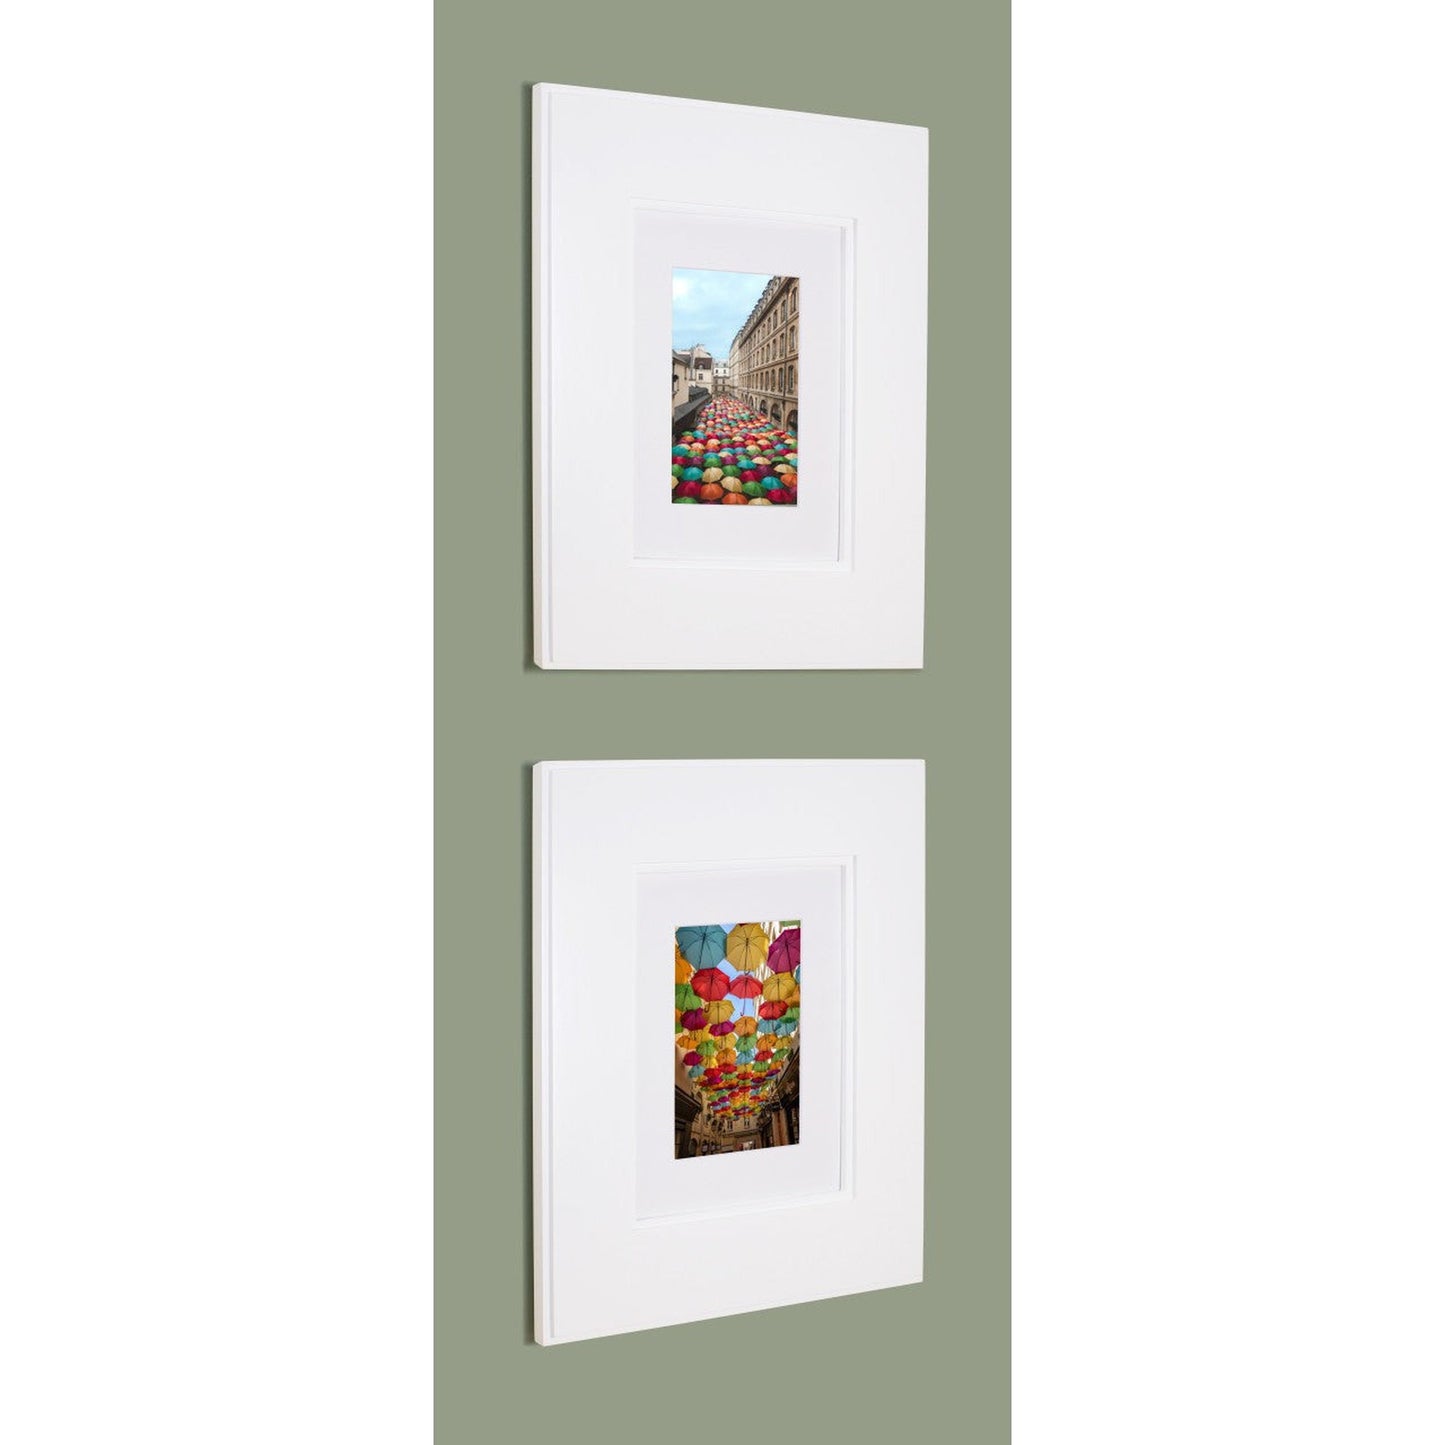 Fox Hollow Furnishings 11" x 14" White Compact Portrait Shaker Special 3" Depth Recessed Picture Frame Medicine Cabinet With Mirror